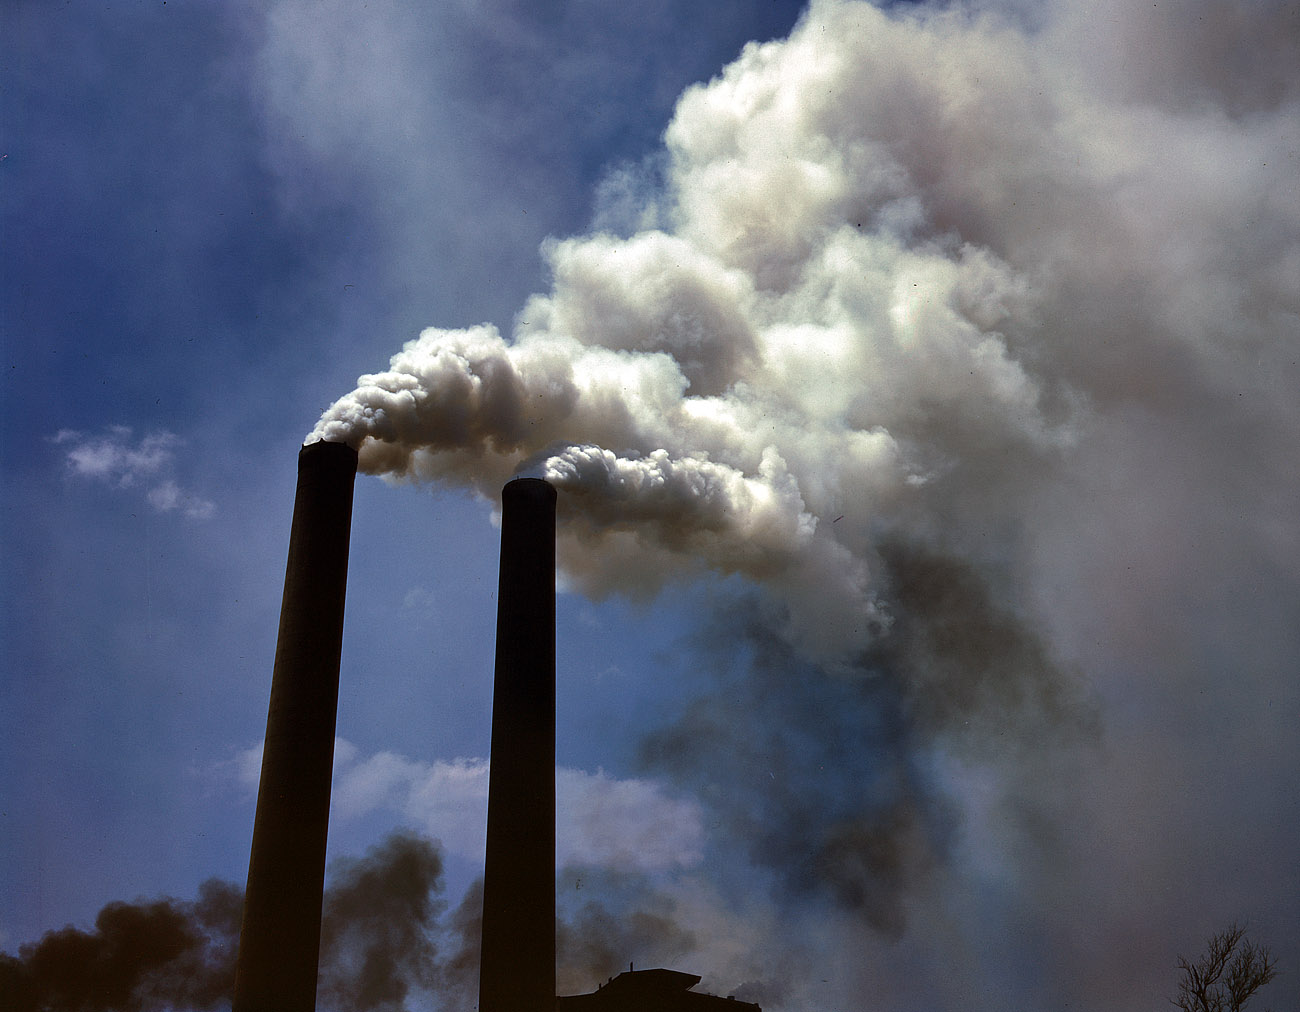 One of a series of chemical-plant smokestacks photographed by Alfred Palmer in Muscle Shoals, Alabama, and Akron, Ohio, in 1942. View full size. 4x5 Kodachrome transparency for the Office of War Information.